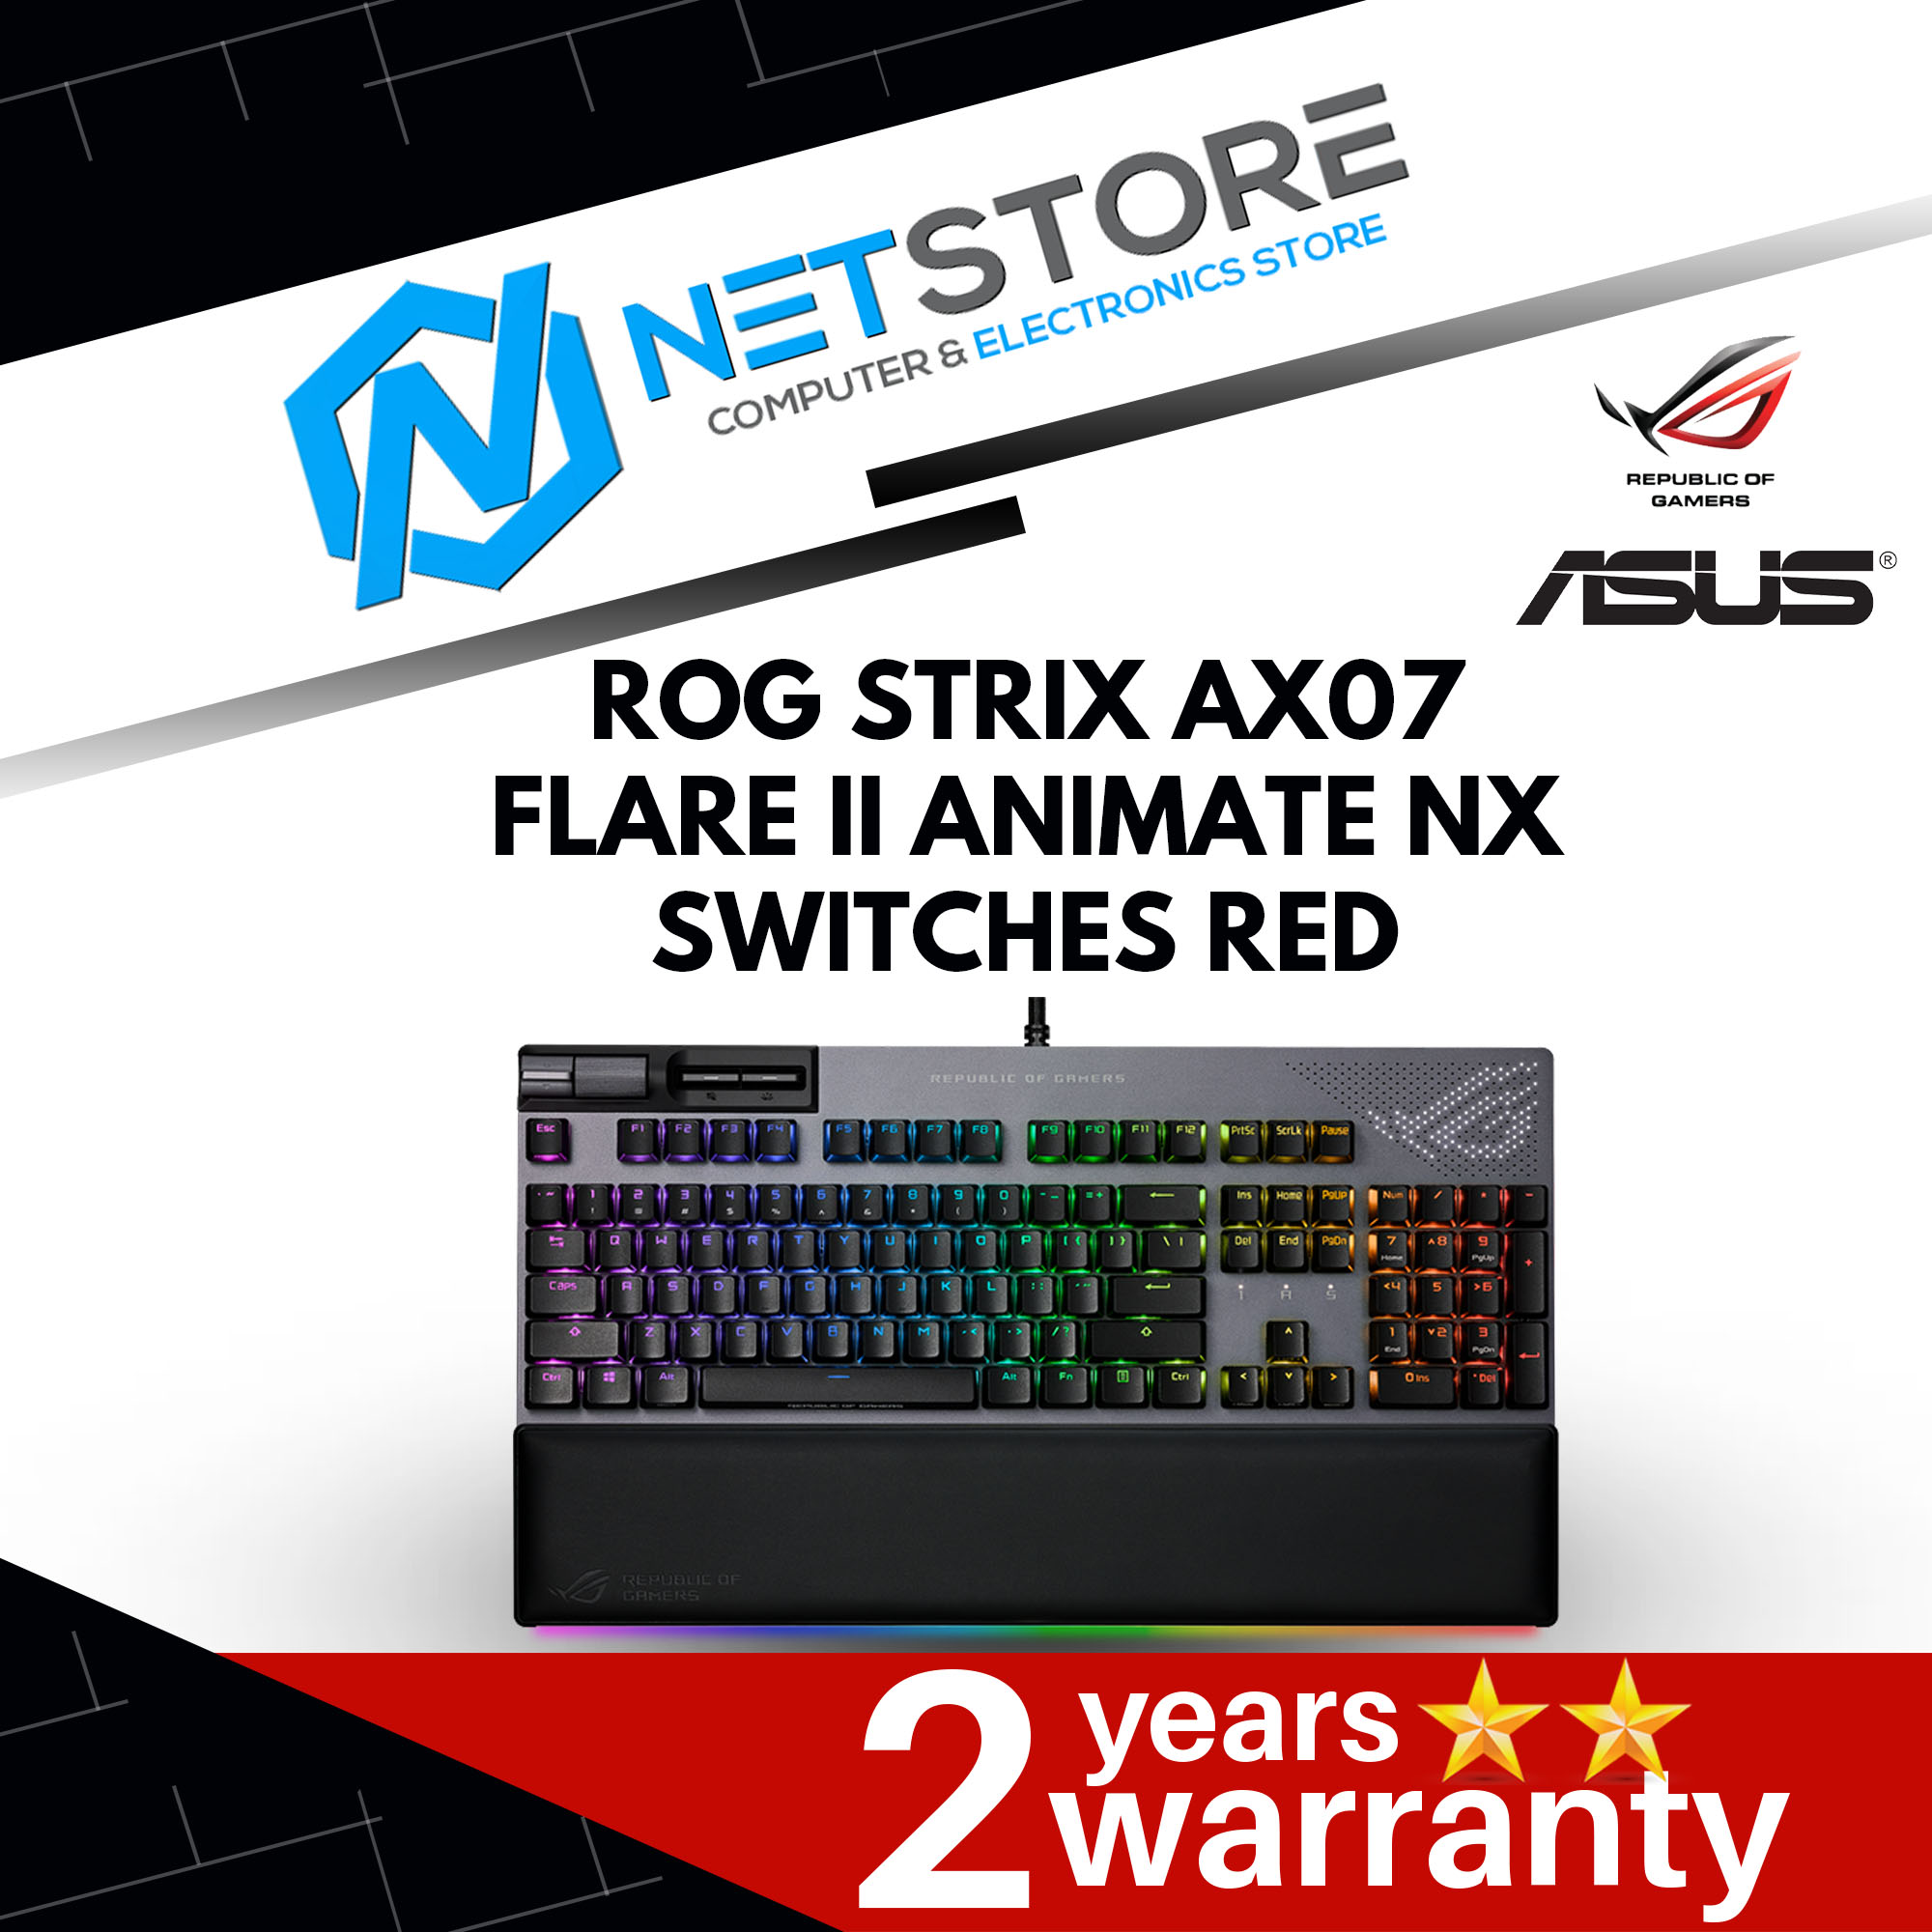 ASUS ROG STRIX AX07 FLARE II ANIMATE NX SWITCHES RED KEYBOARD